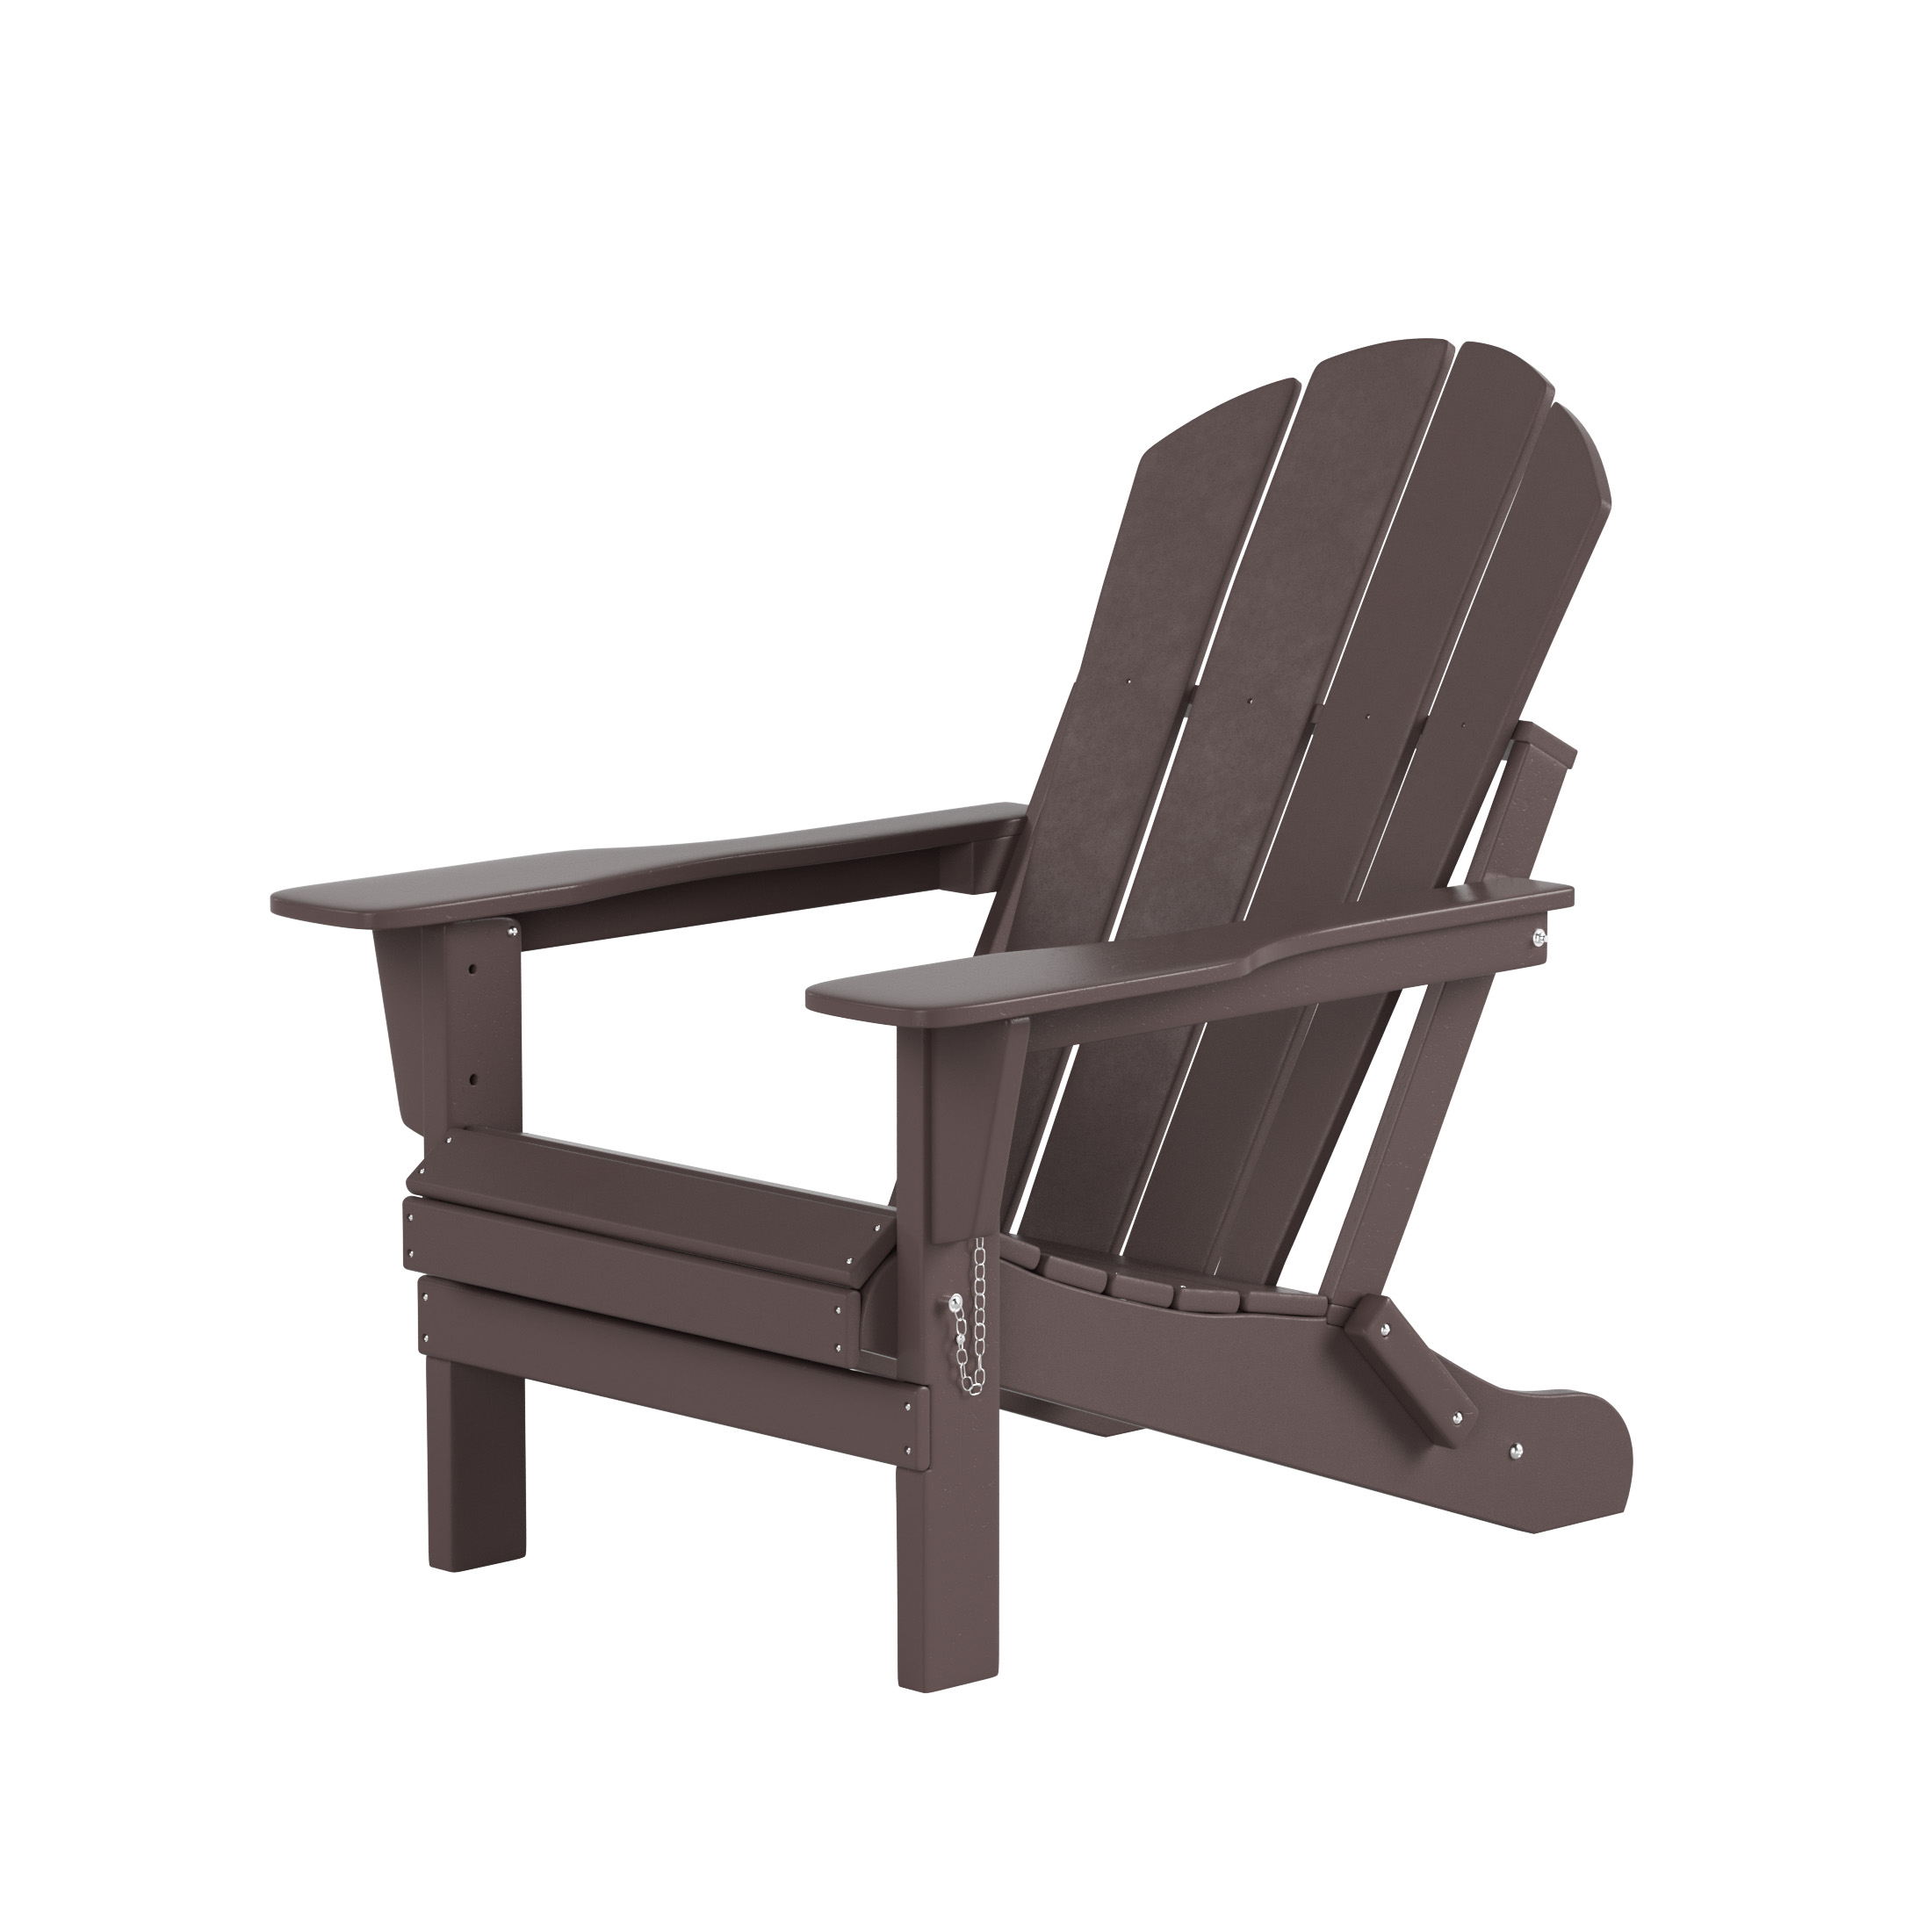 Westintrends Outdoor Folding HDPE Adirondack Chair, Patio Seat, Weather Resistant, Dark Brown - image 2 of 6